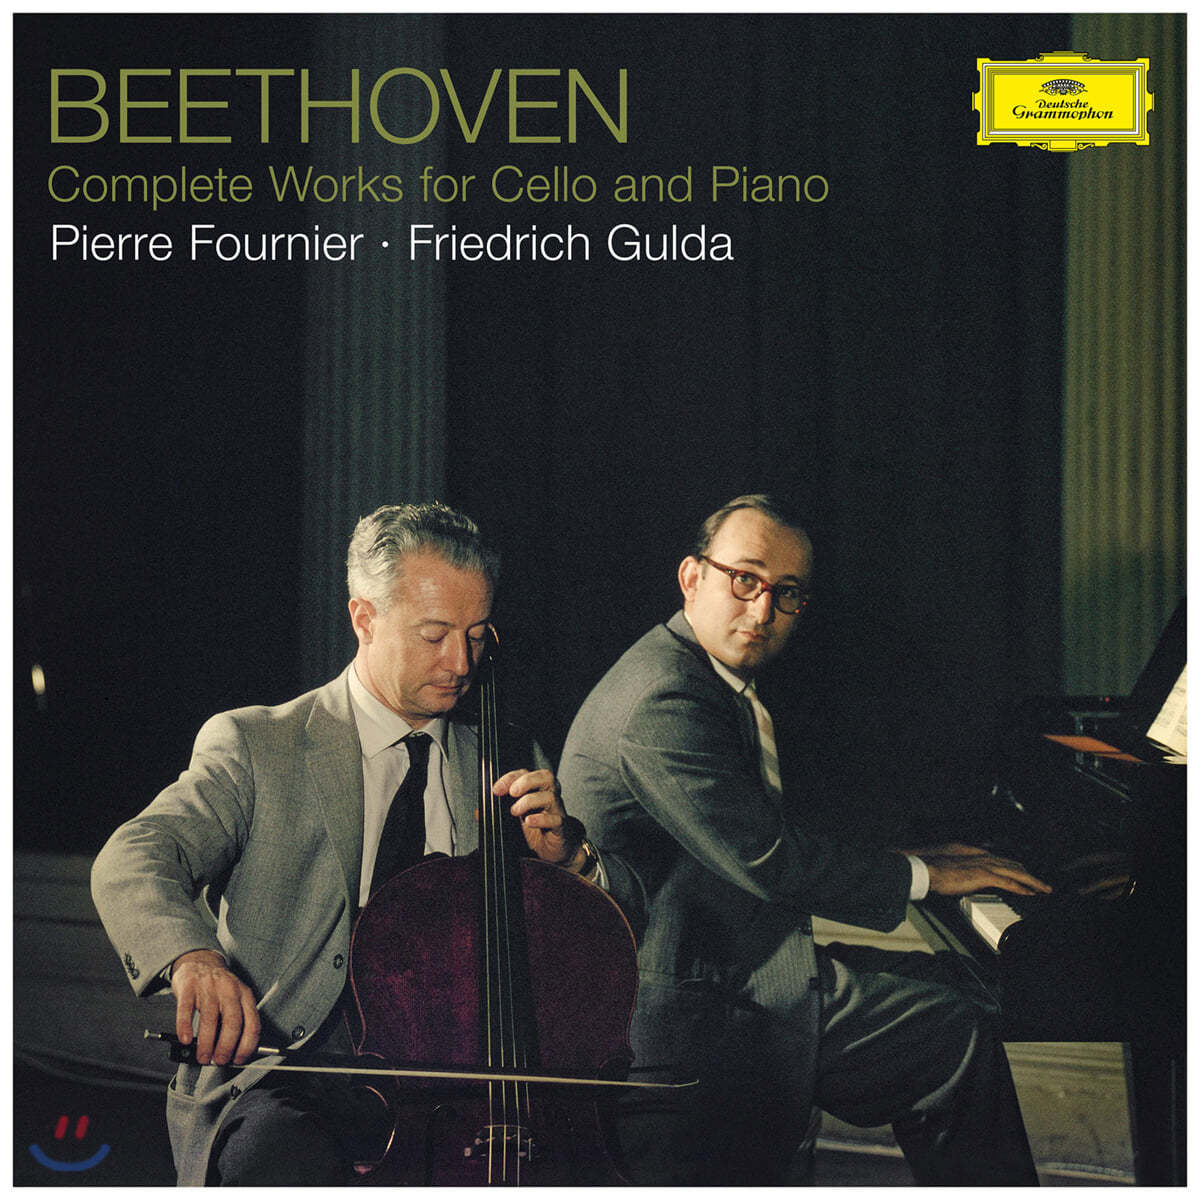 Pierre Fournier / Friedrich Gulda 베토벤: 첼로 소나타 전곡집 (Beethoven: Complete Works for Cello and Piano) [3LP]